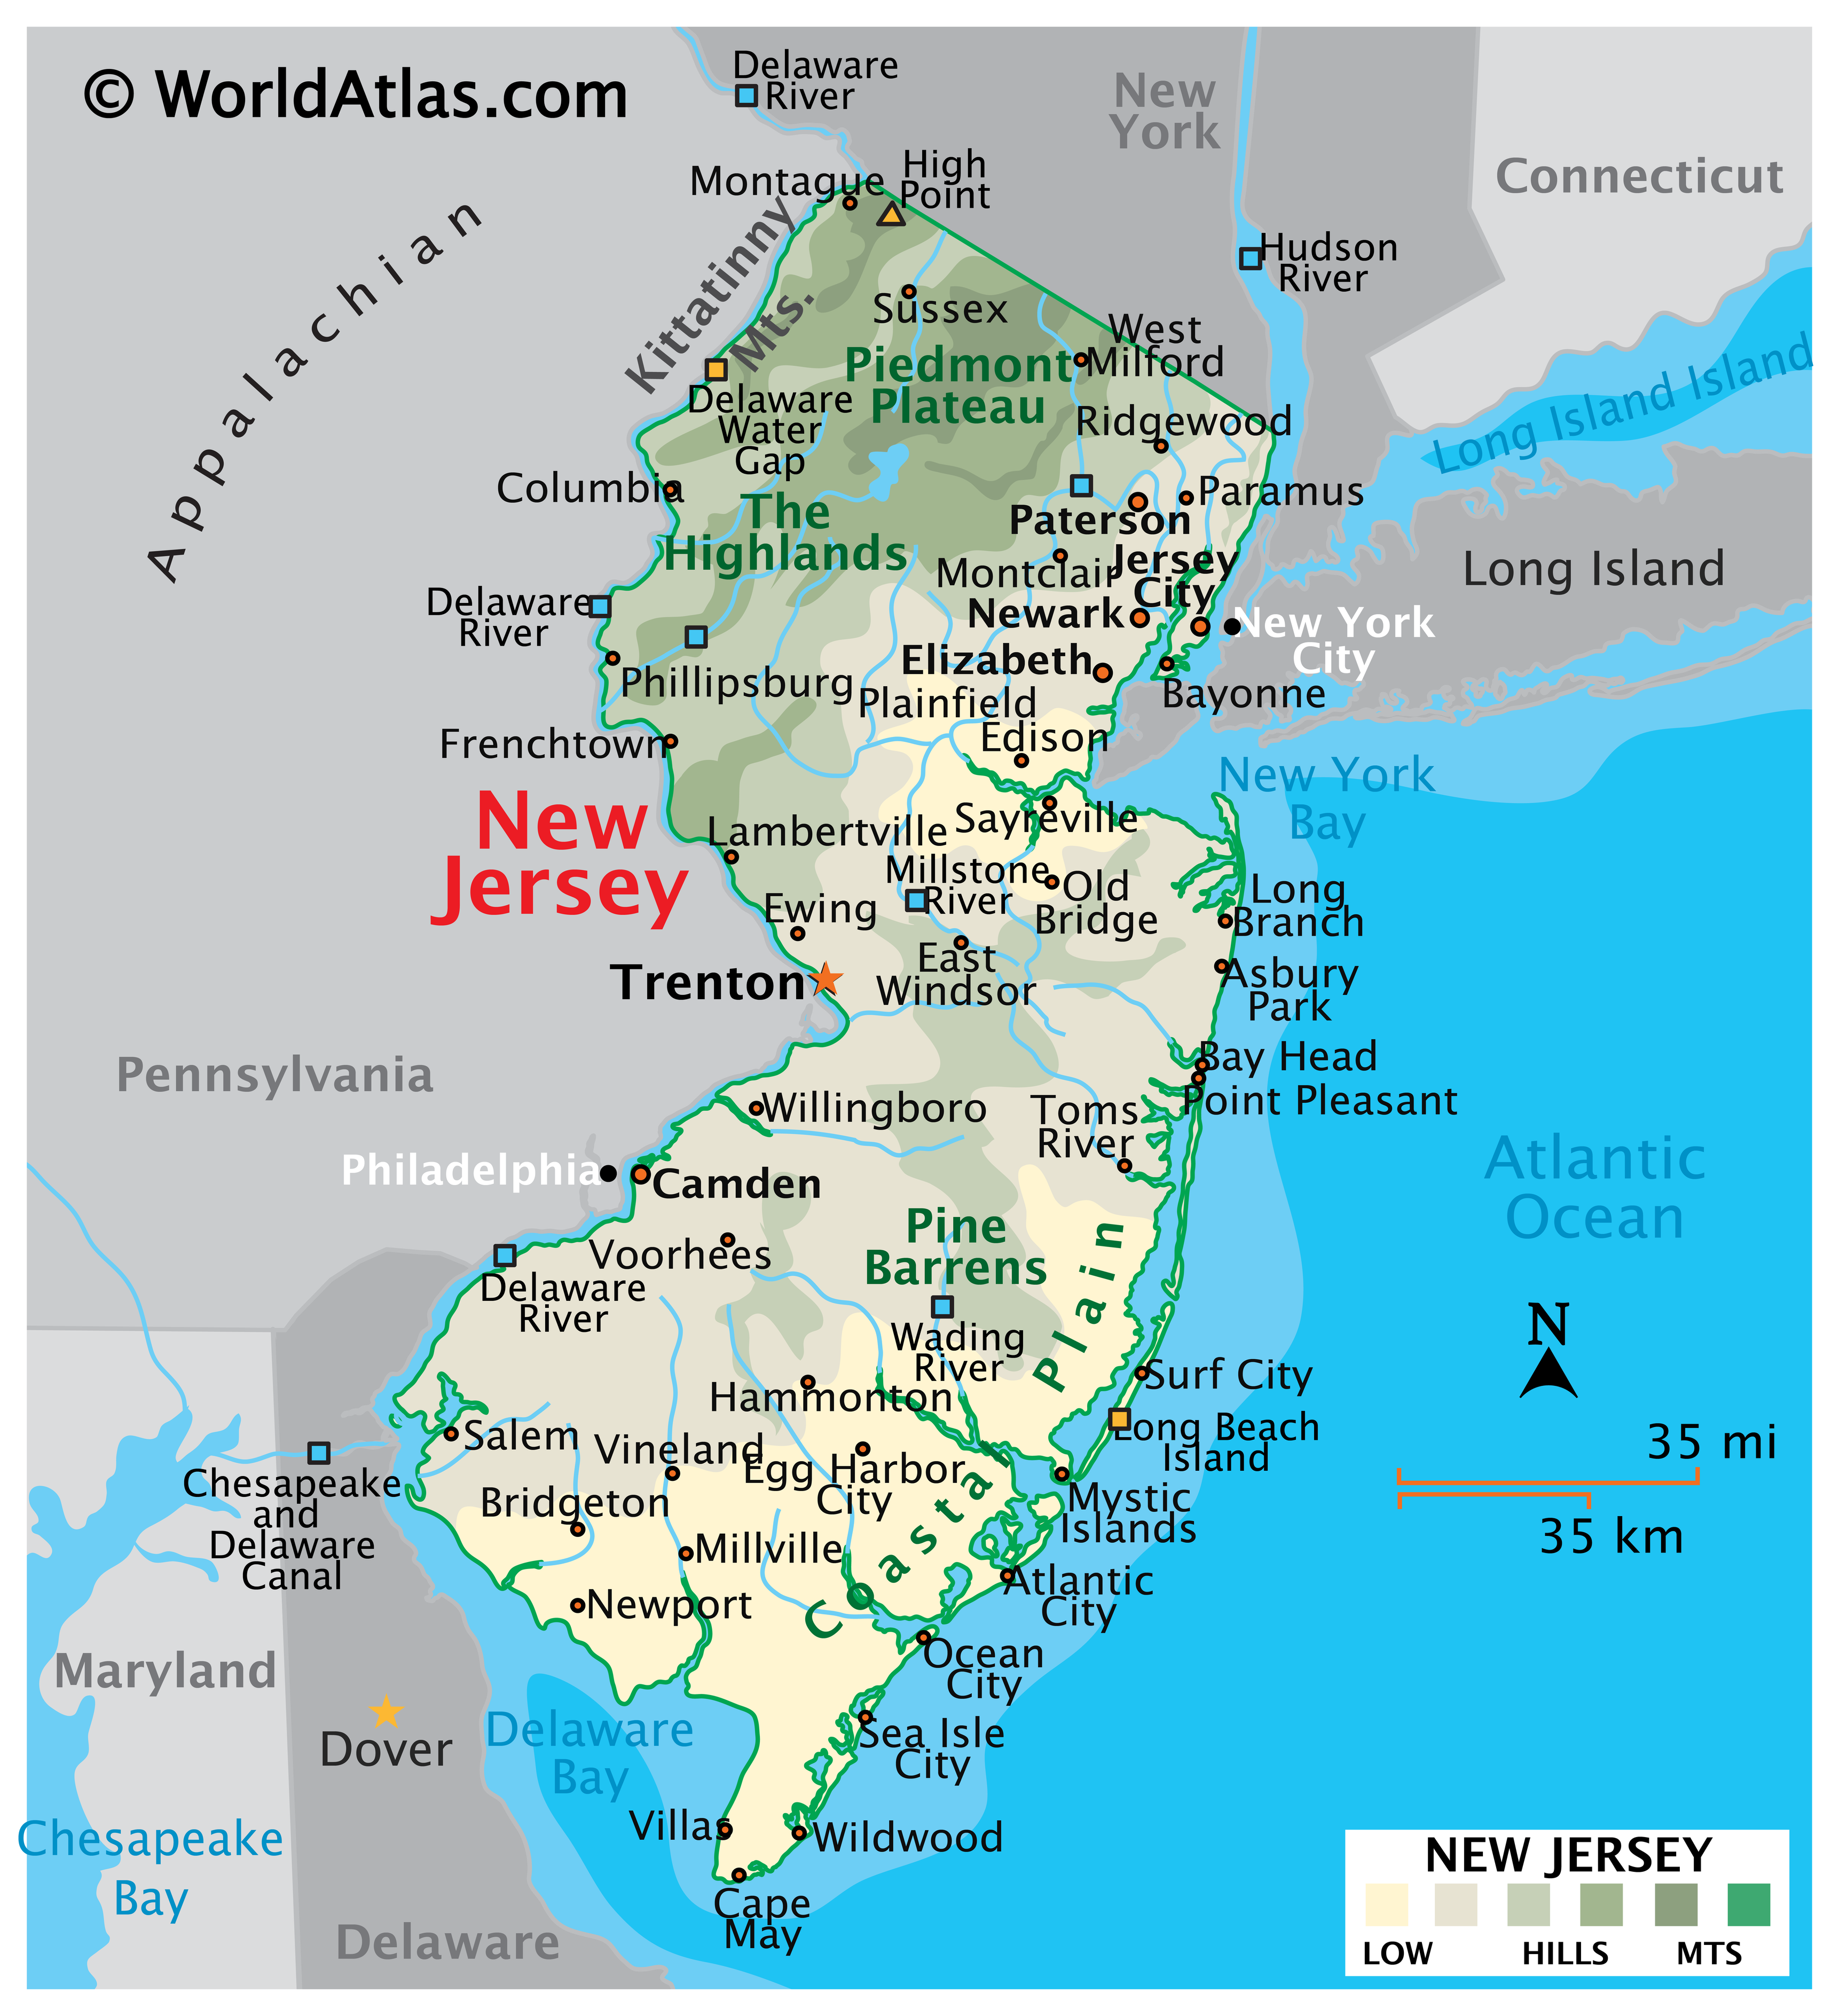 how big is the state of new jersey